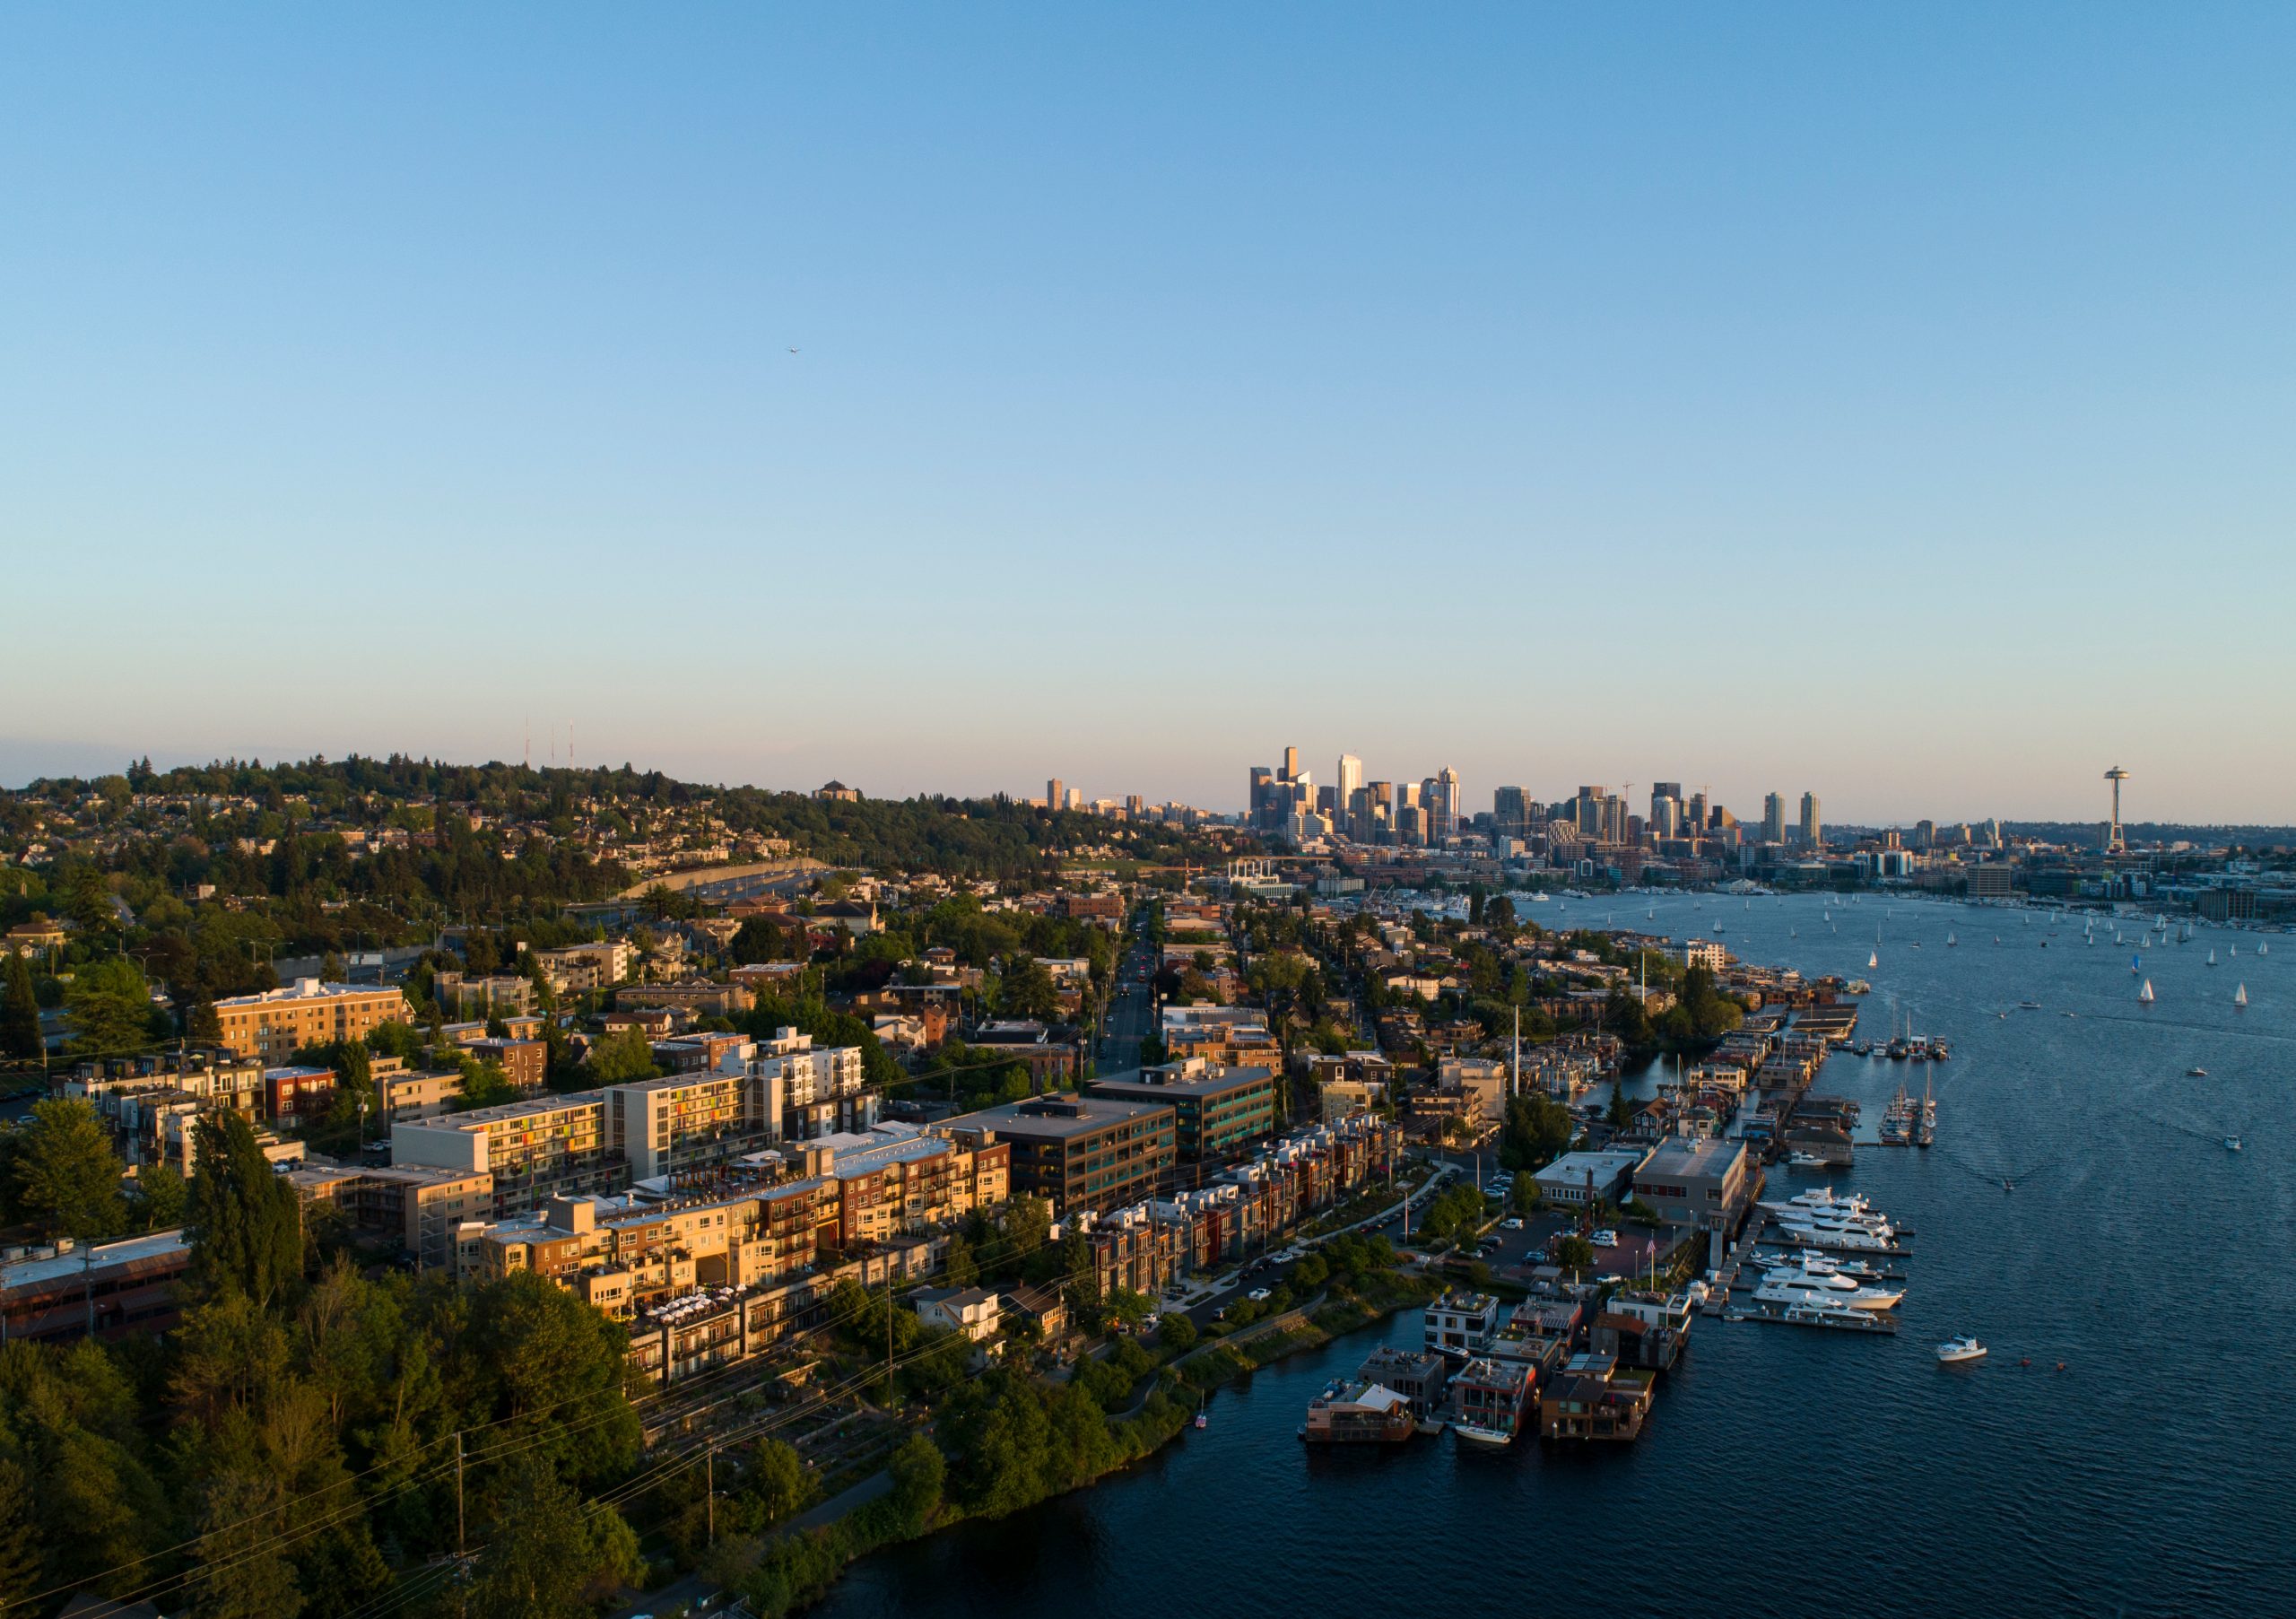 Seattle Eastlake Capitol Hill and Downtown Aerial Neighborhood Cityscape Vibrant Sunset Lighting Clear Blue Sky